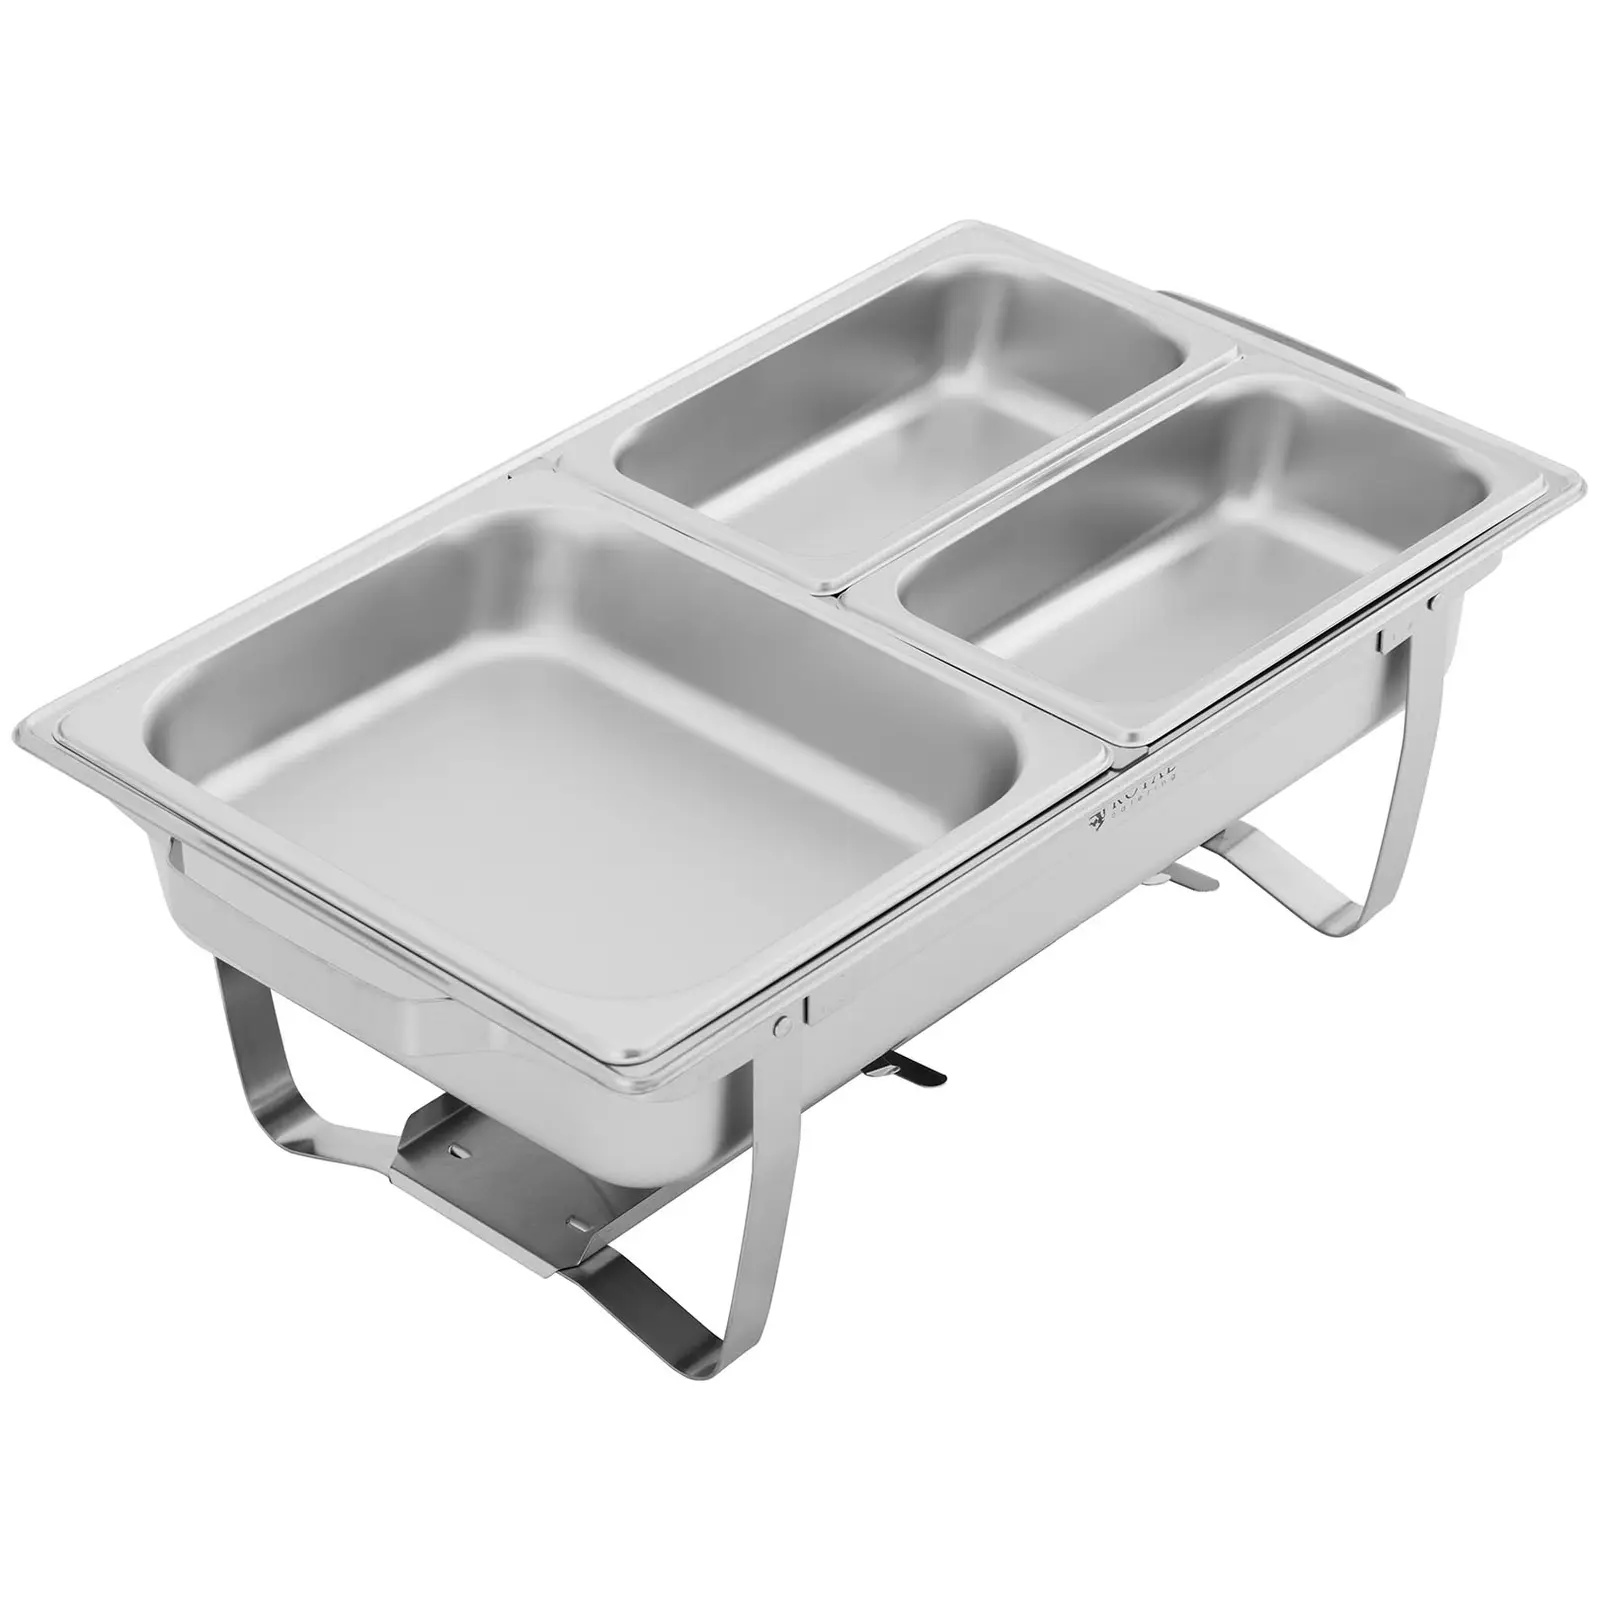 Chafing Dish - GN 1/2 - 2 x GN 1/4 - 9 L - 2 contenedores de combustible - 295 x 235 x 60 / 240 x 135 x 65 mm - Royal Catering